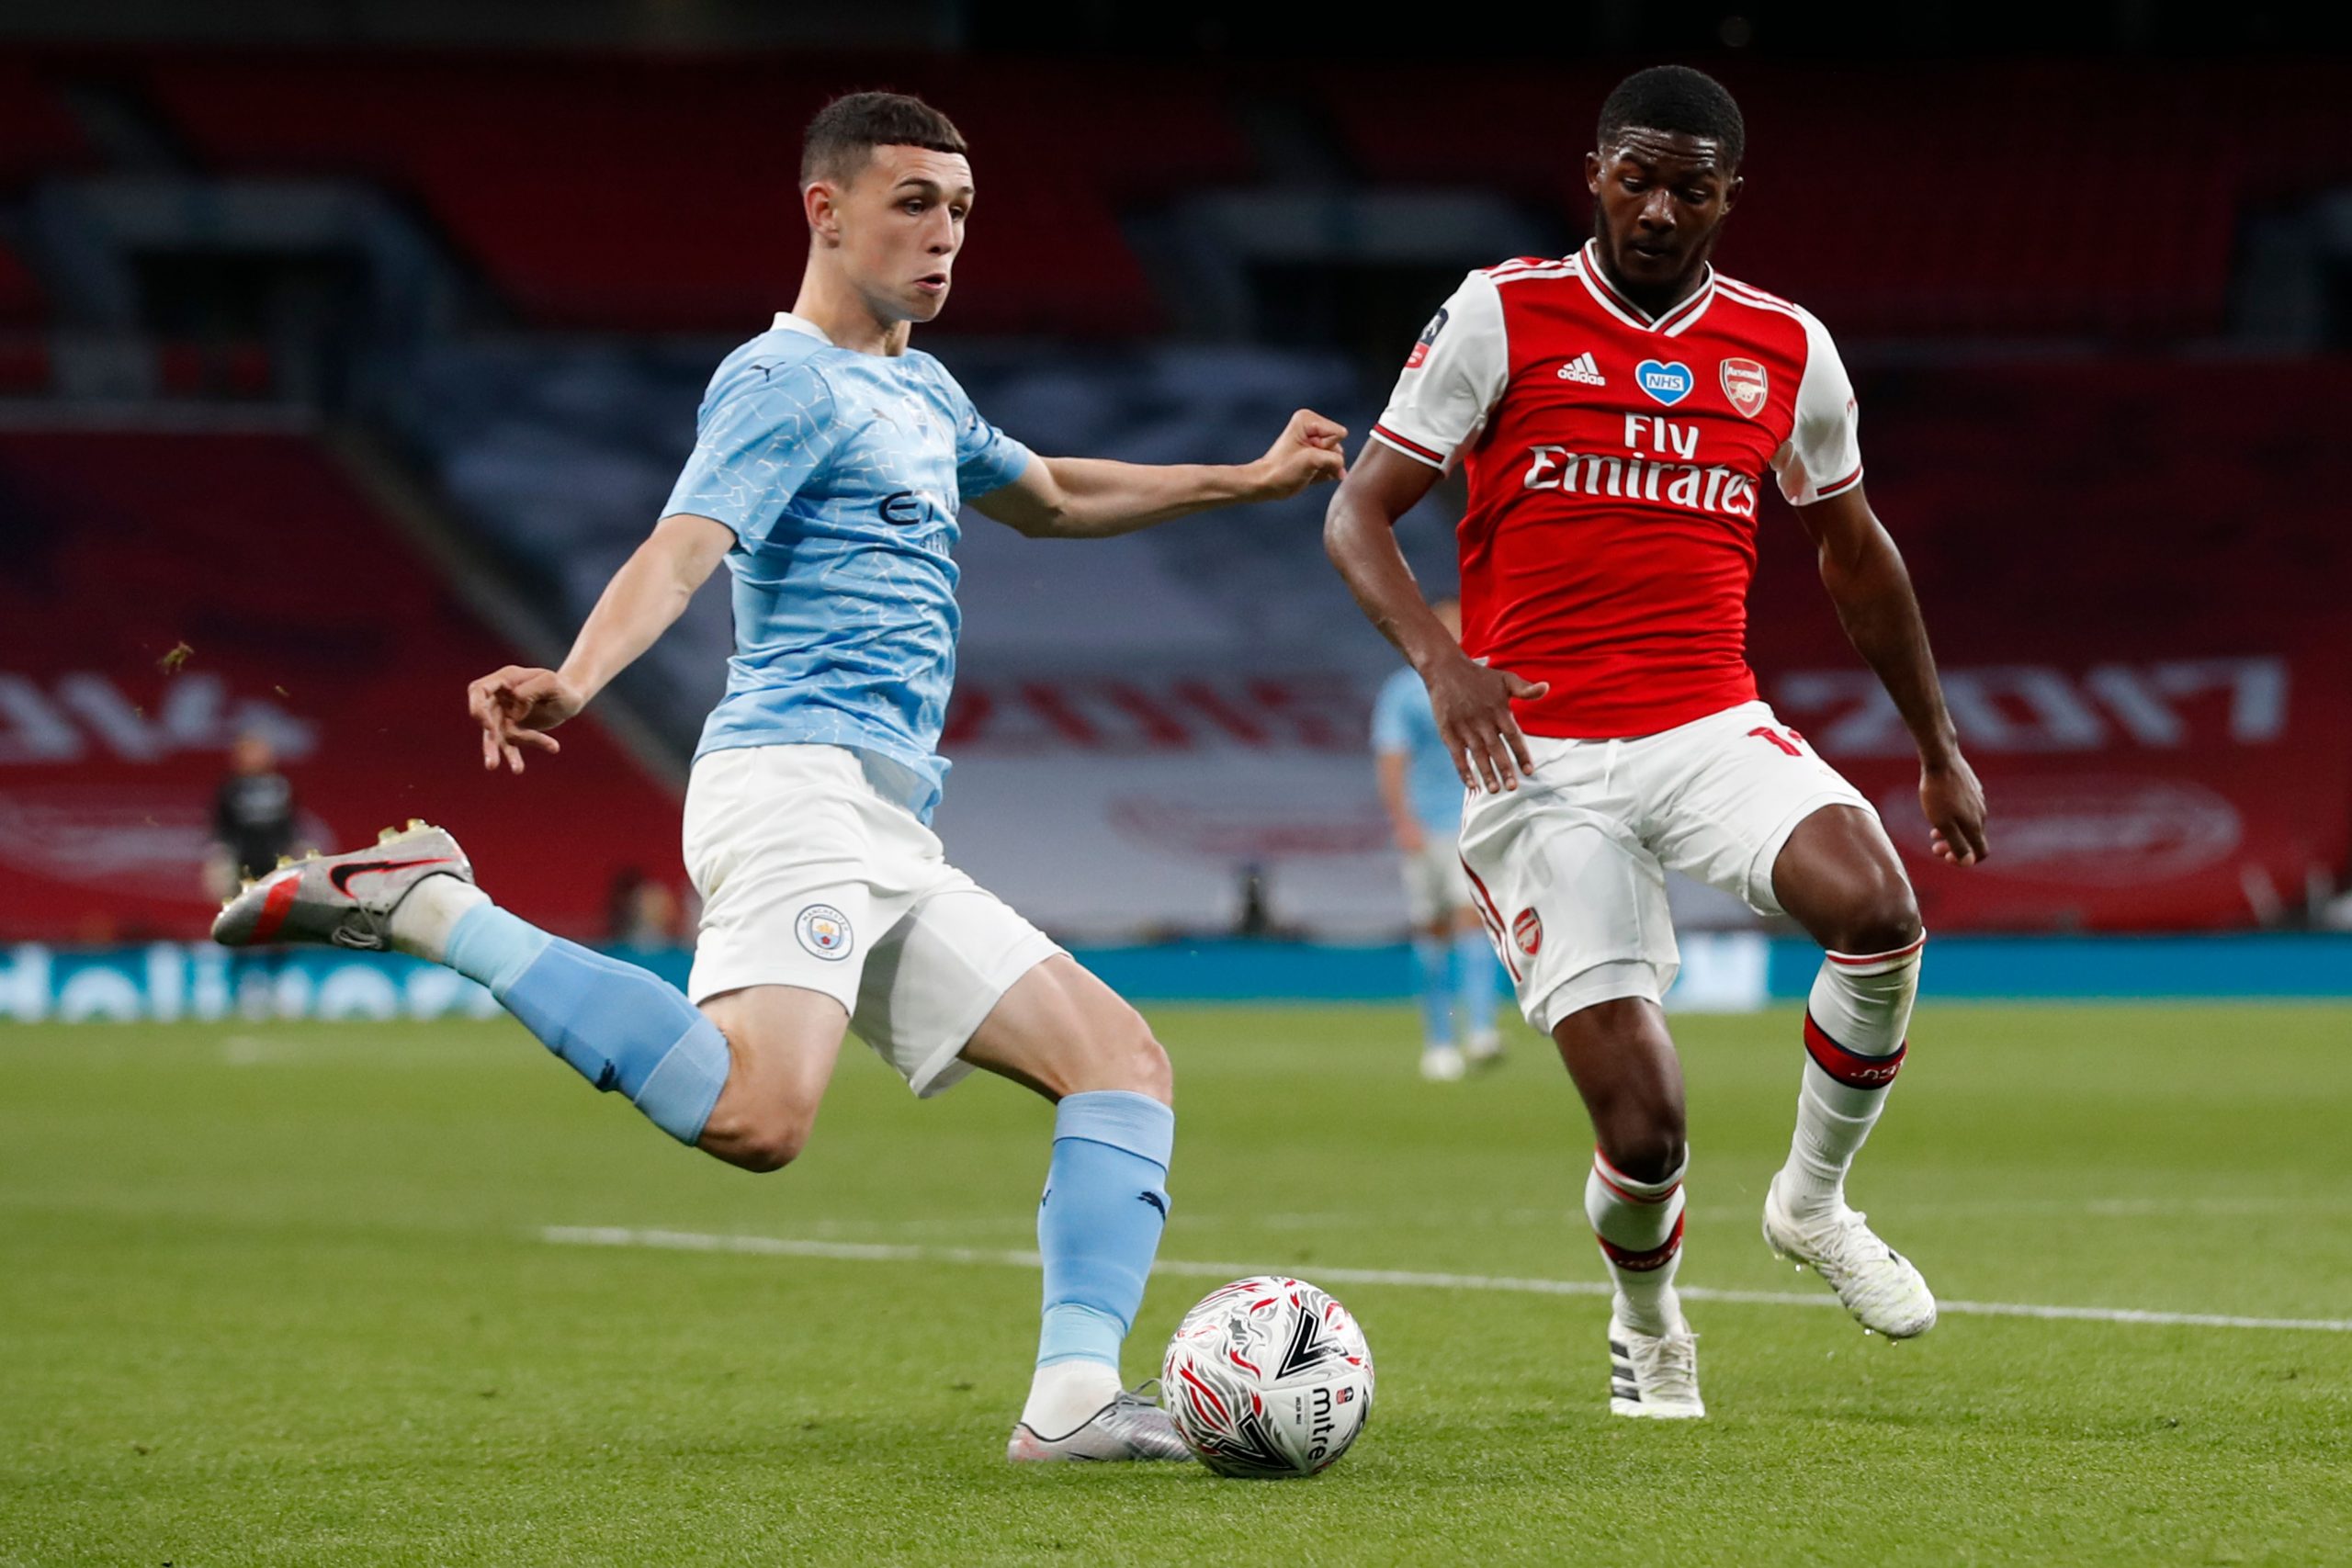 Real Madrid emerge as serious contenders for Phil Foden who is seen in the photo